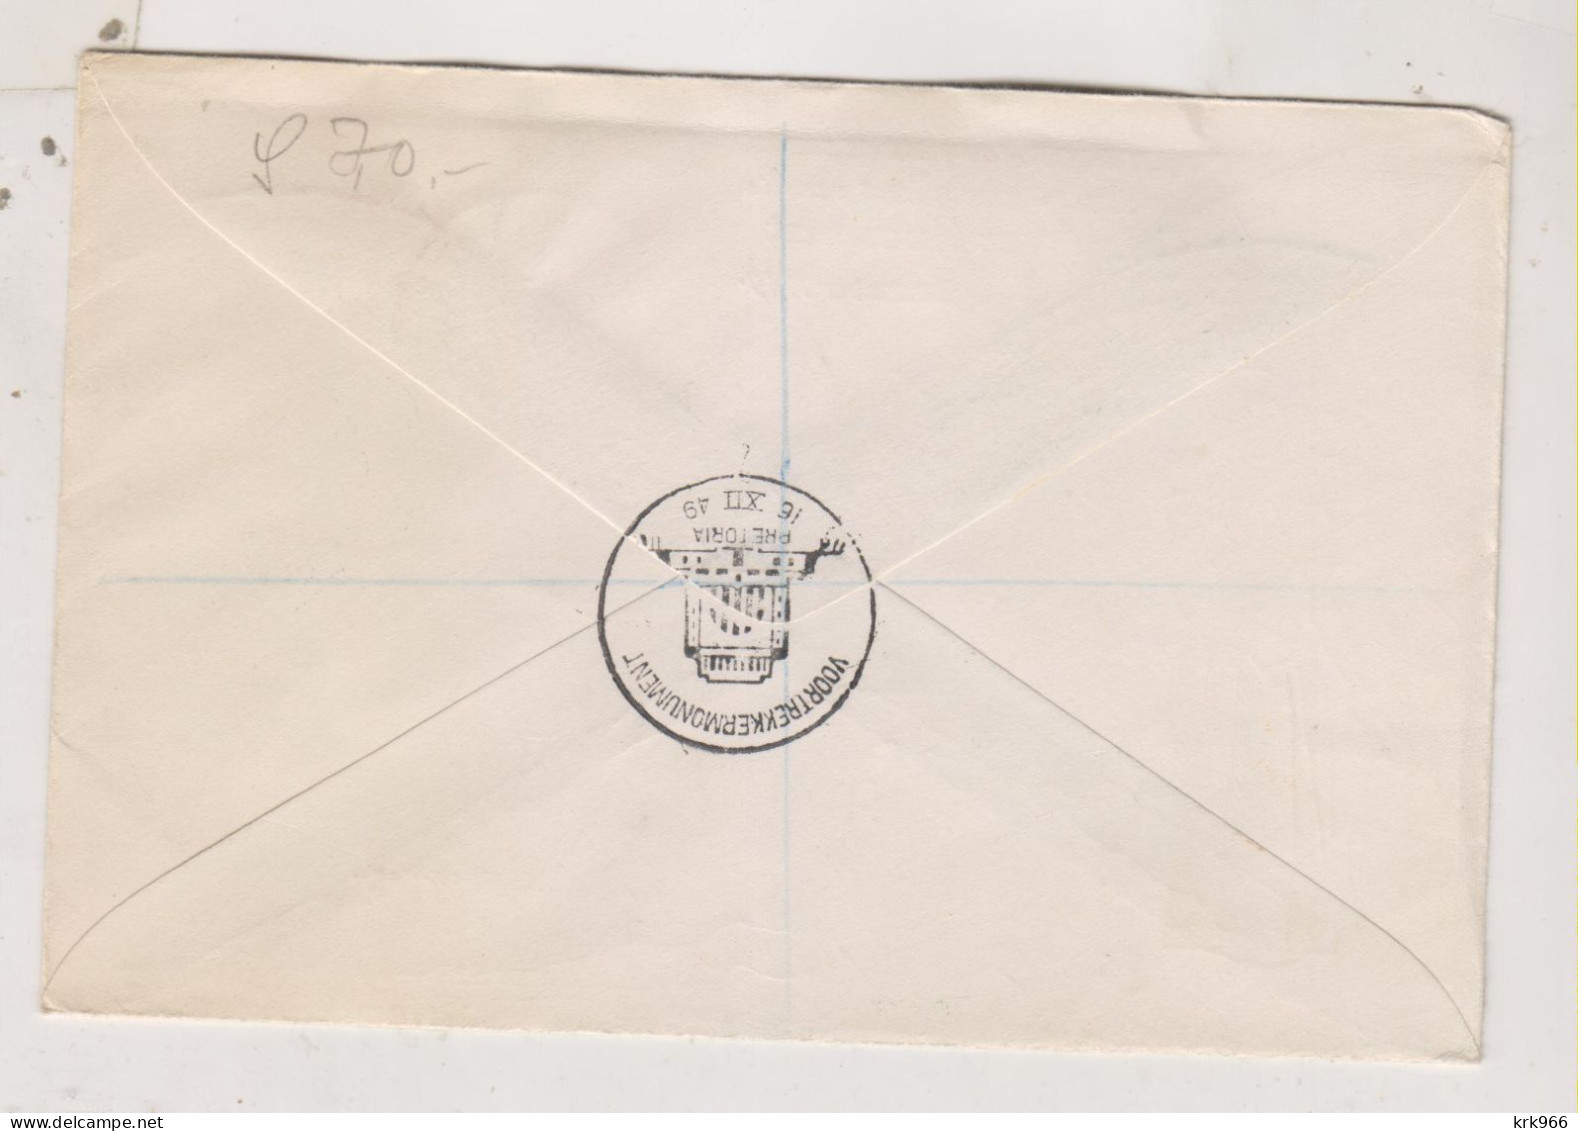 SOUTH AFRICA 1949 PRETORIA Nice Registered FDC Cover - Airmail